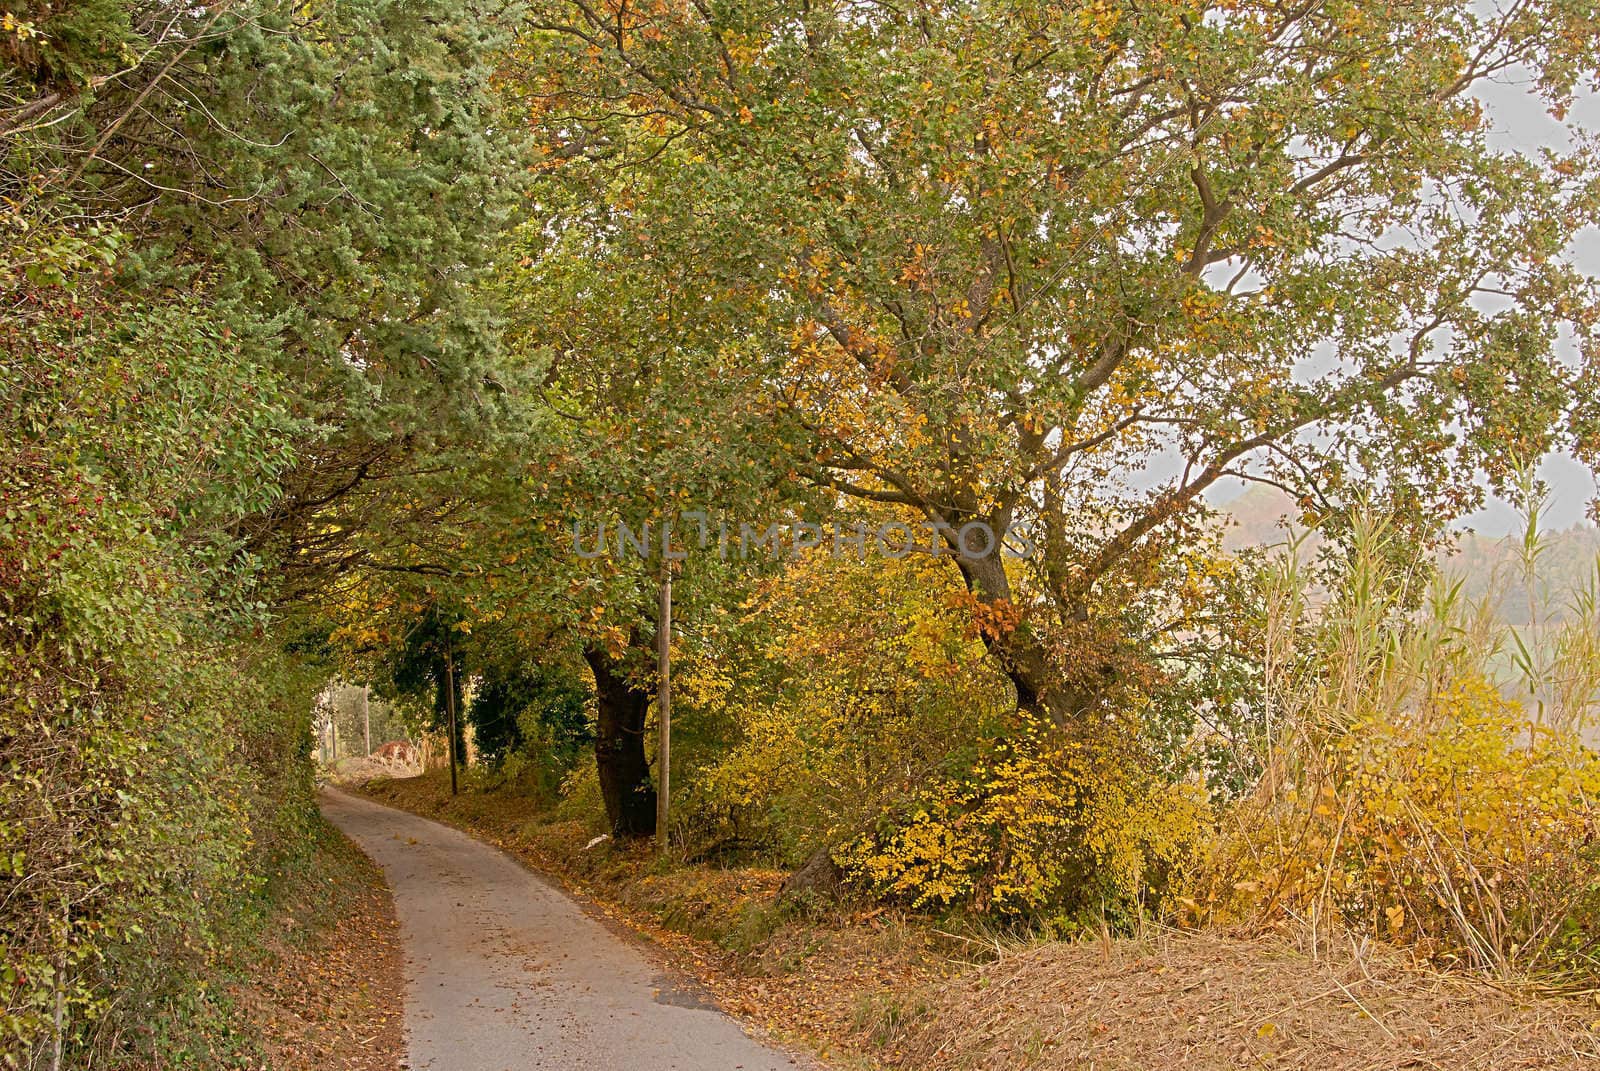 Golden trees surround the bend road by Larisa13